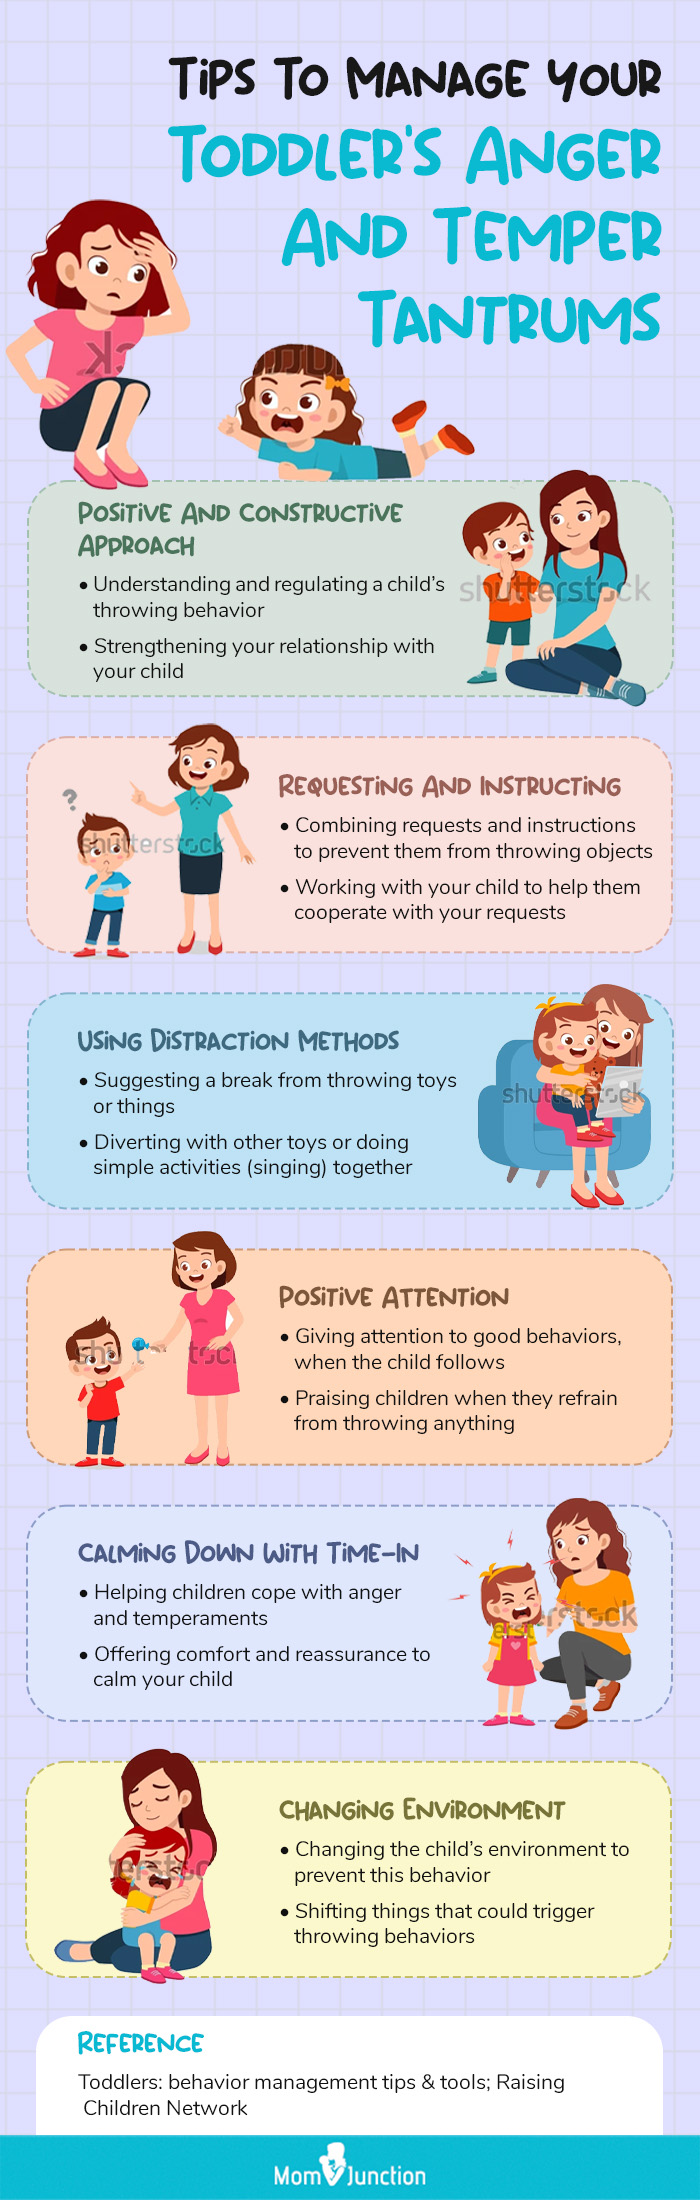 tips to manage your toddler’s anger and temper tantrums (infographic)